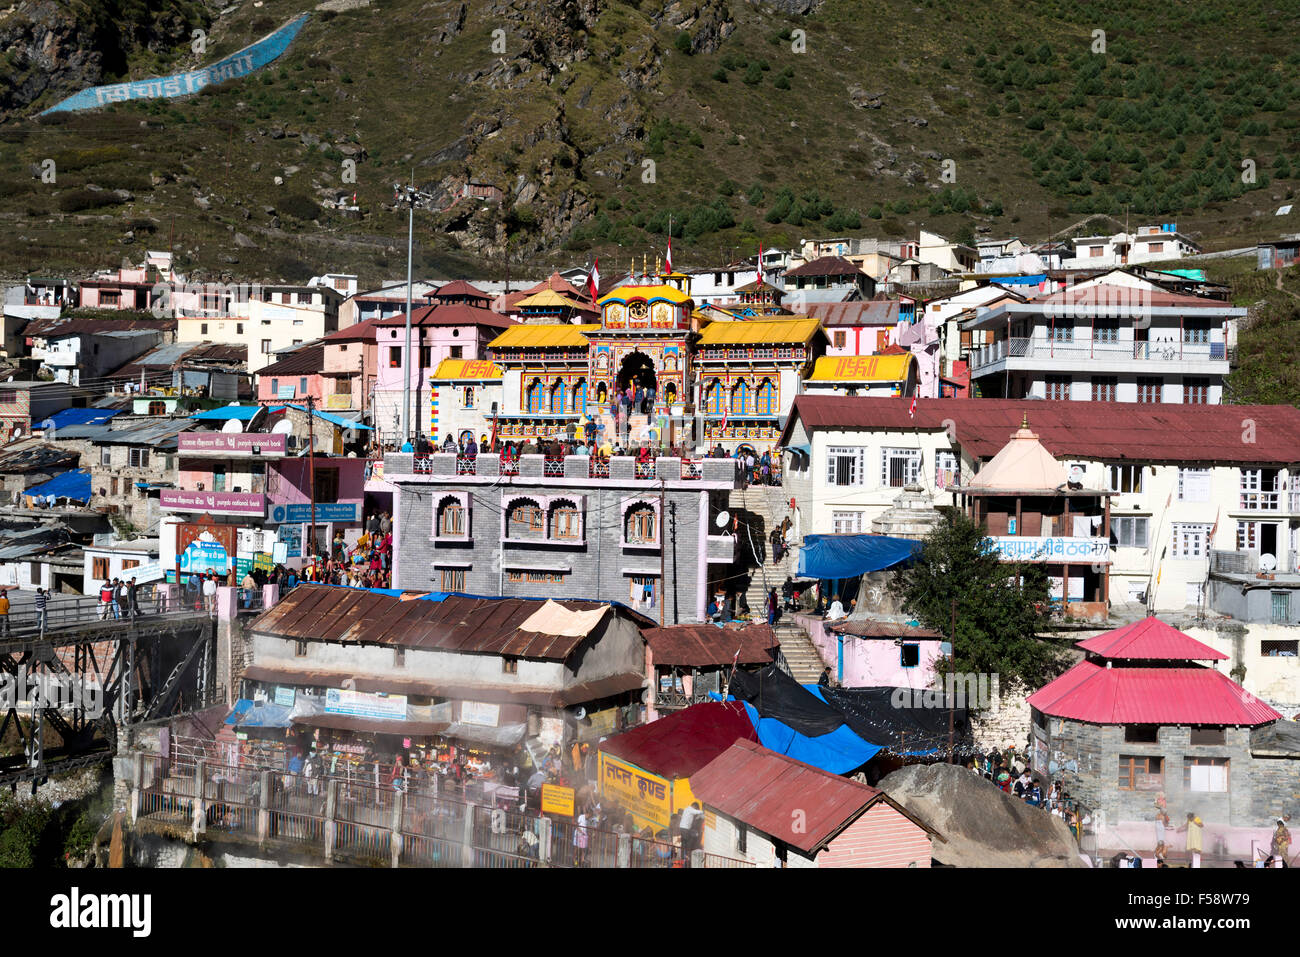 A view of the Badrinath Temple complex, viewed from a bridge spanning the Alakananda river and Hot water bathing kund, India Stock Photo